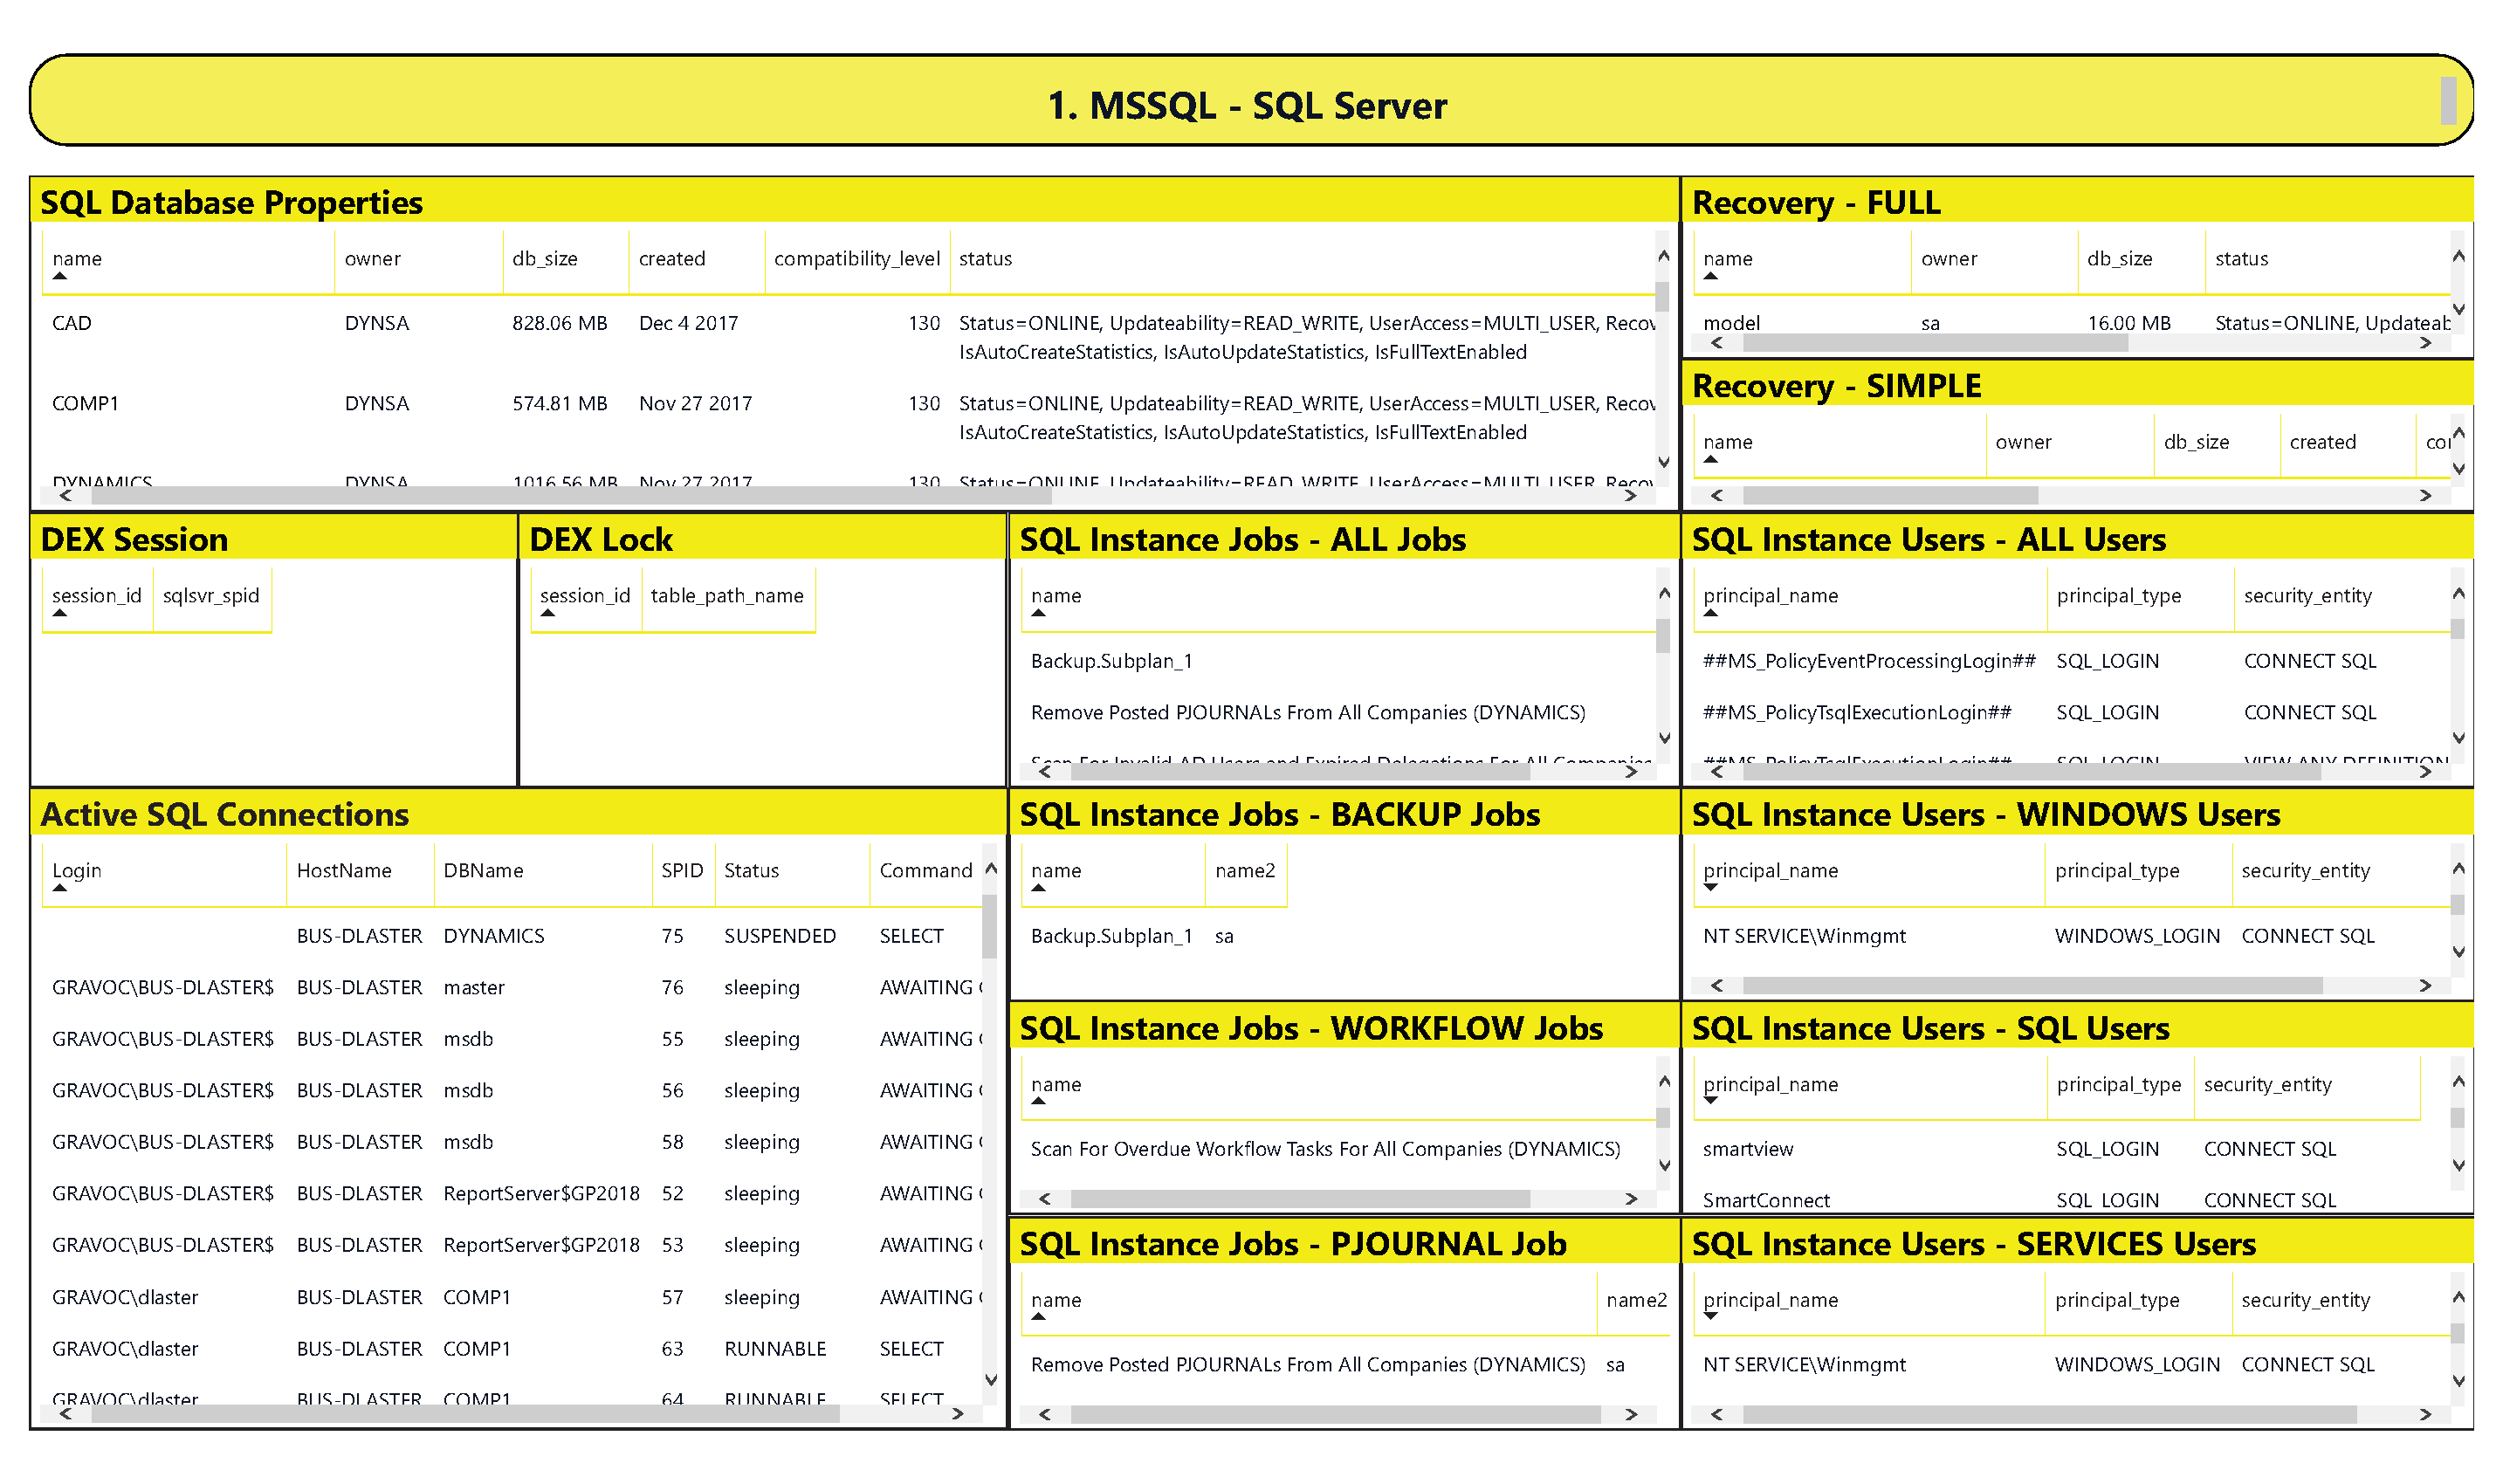 Power BI Dashboard for GP Admins, Managers & Users - MSSQL